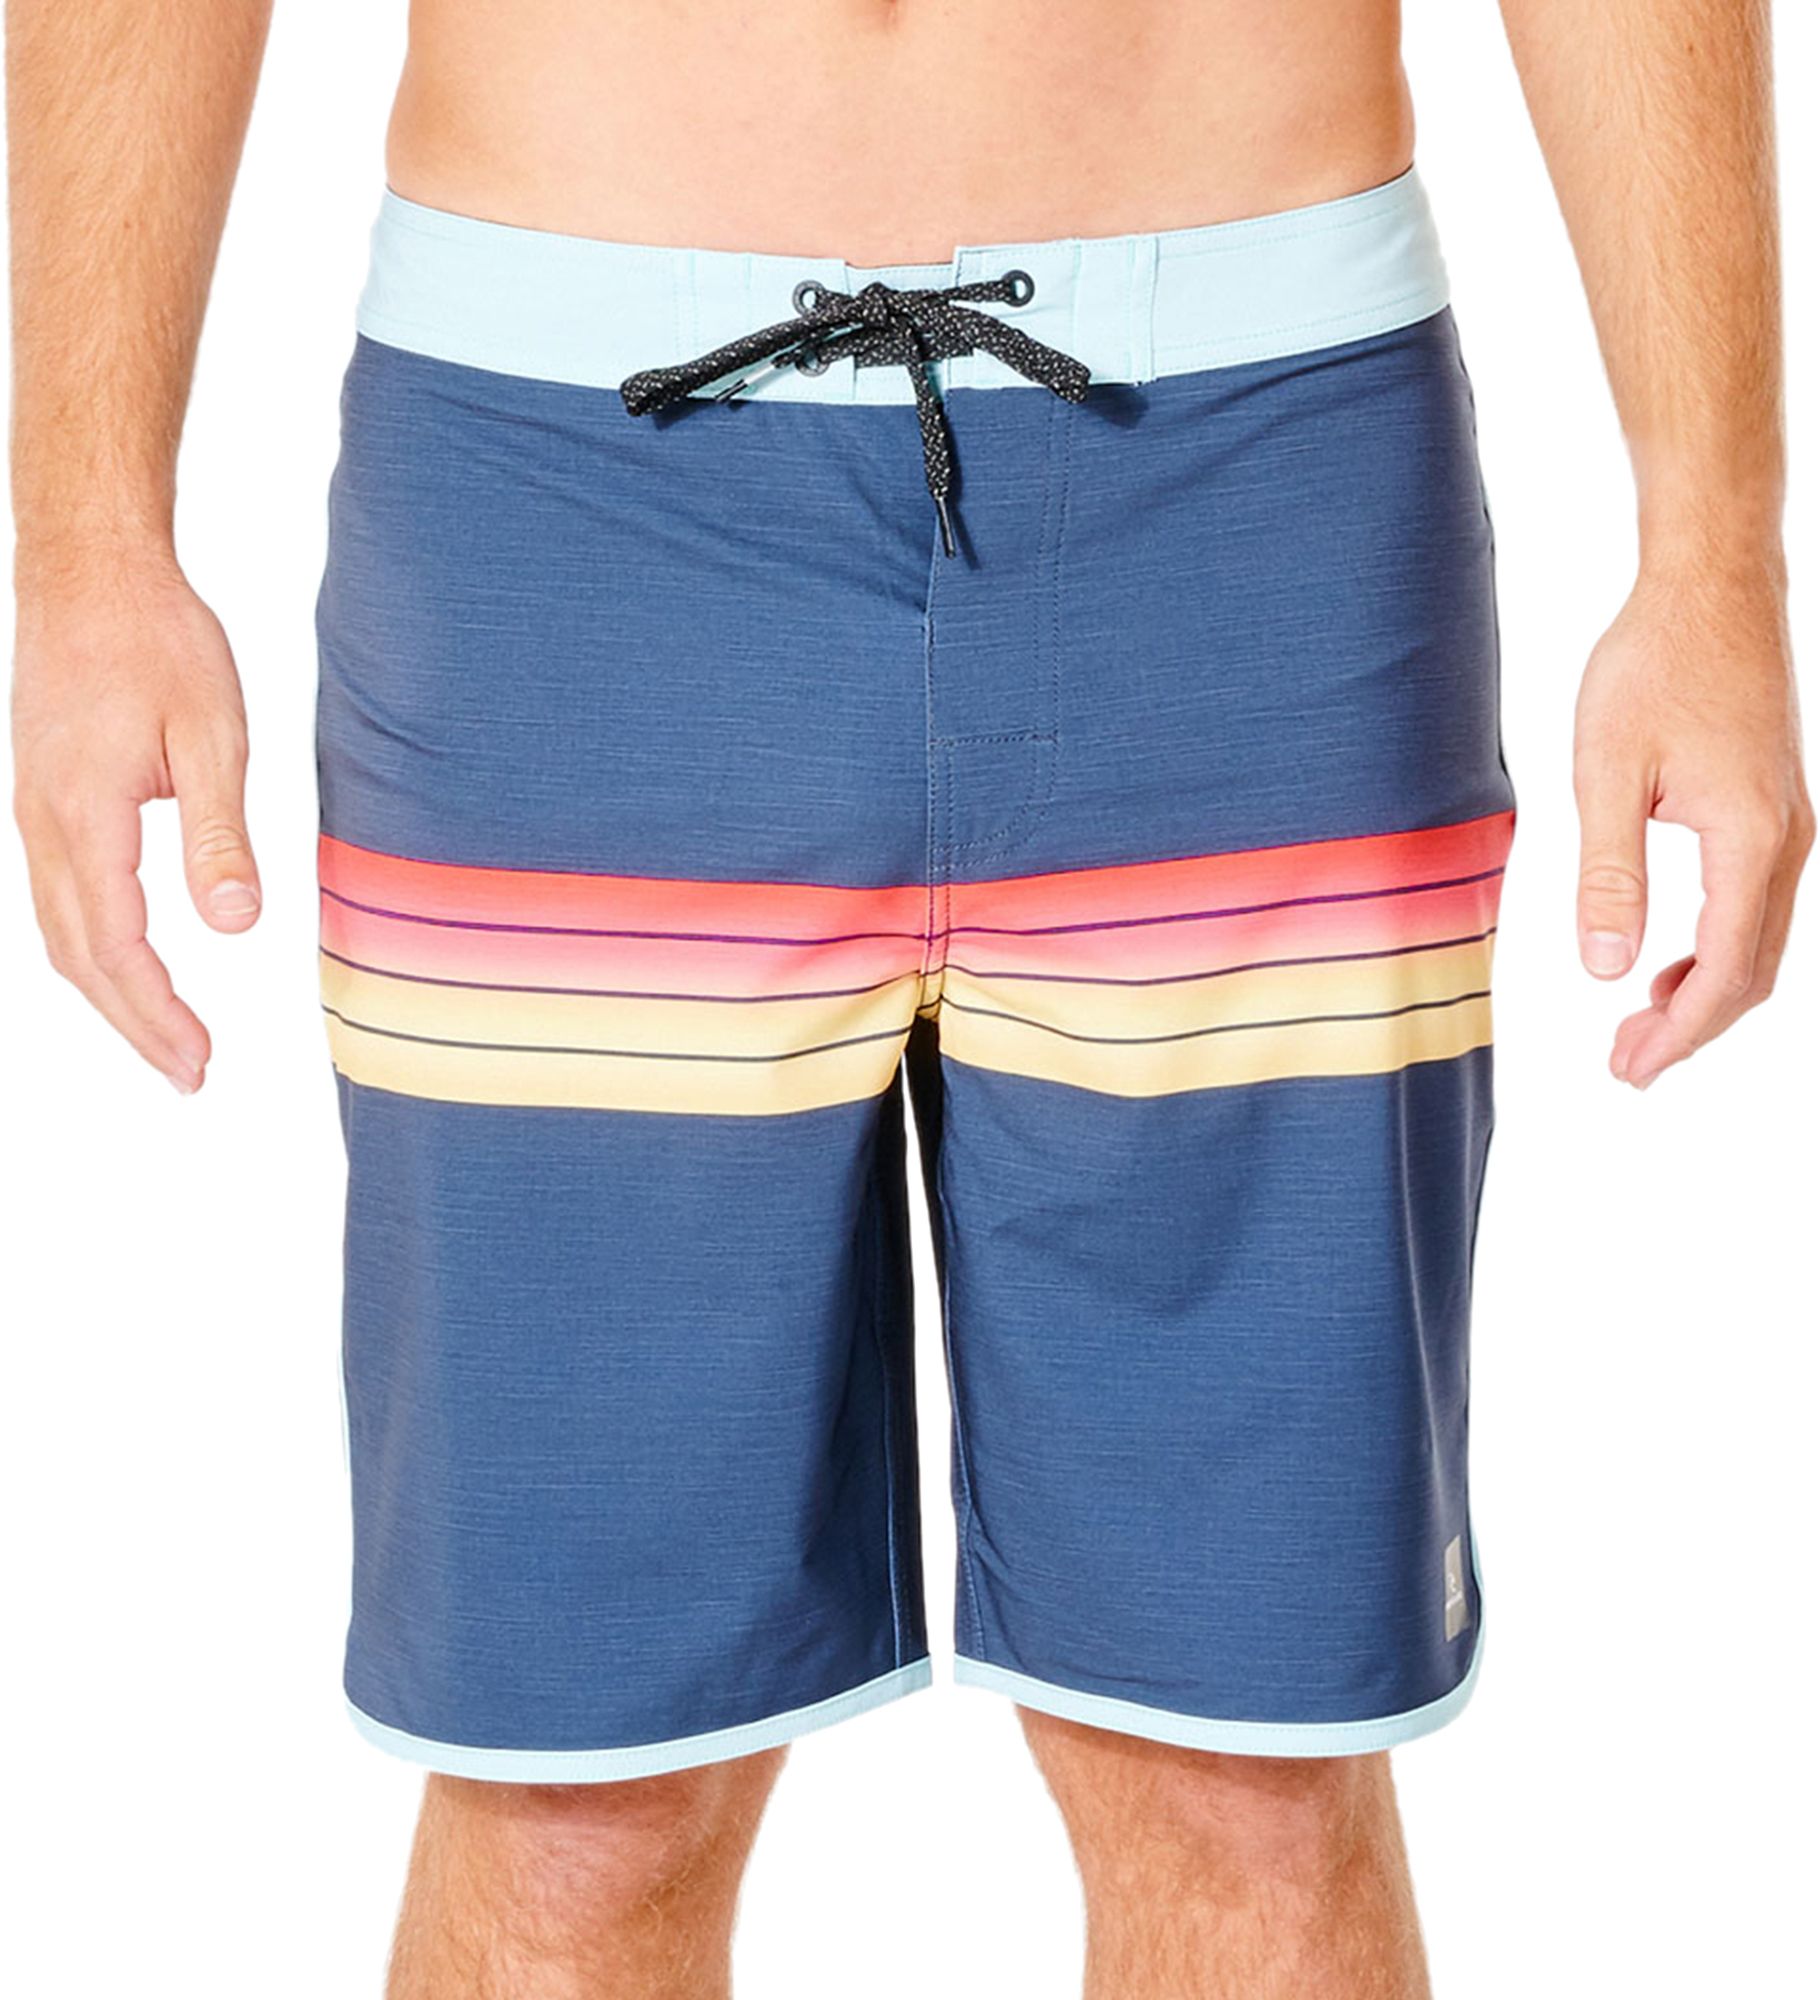 Photos - Swimwear Rip Curl Men's Mirage Surf Revival 19” Board Shorts, Size 32, Navy 21AW9MM 